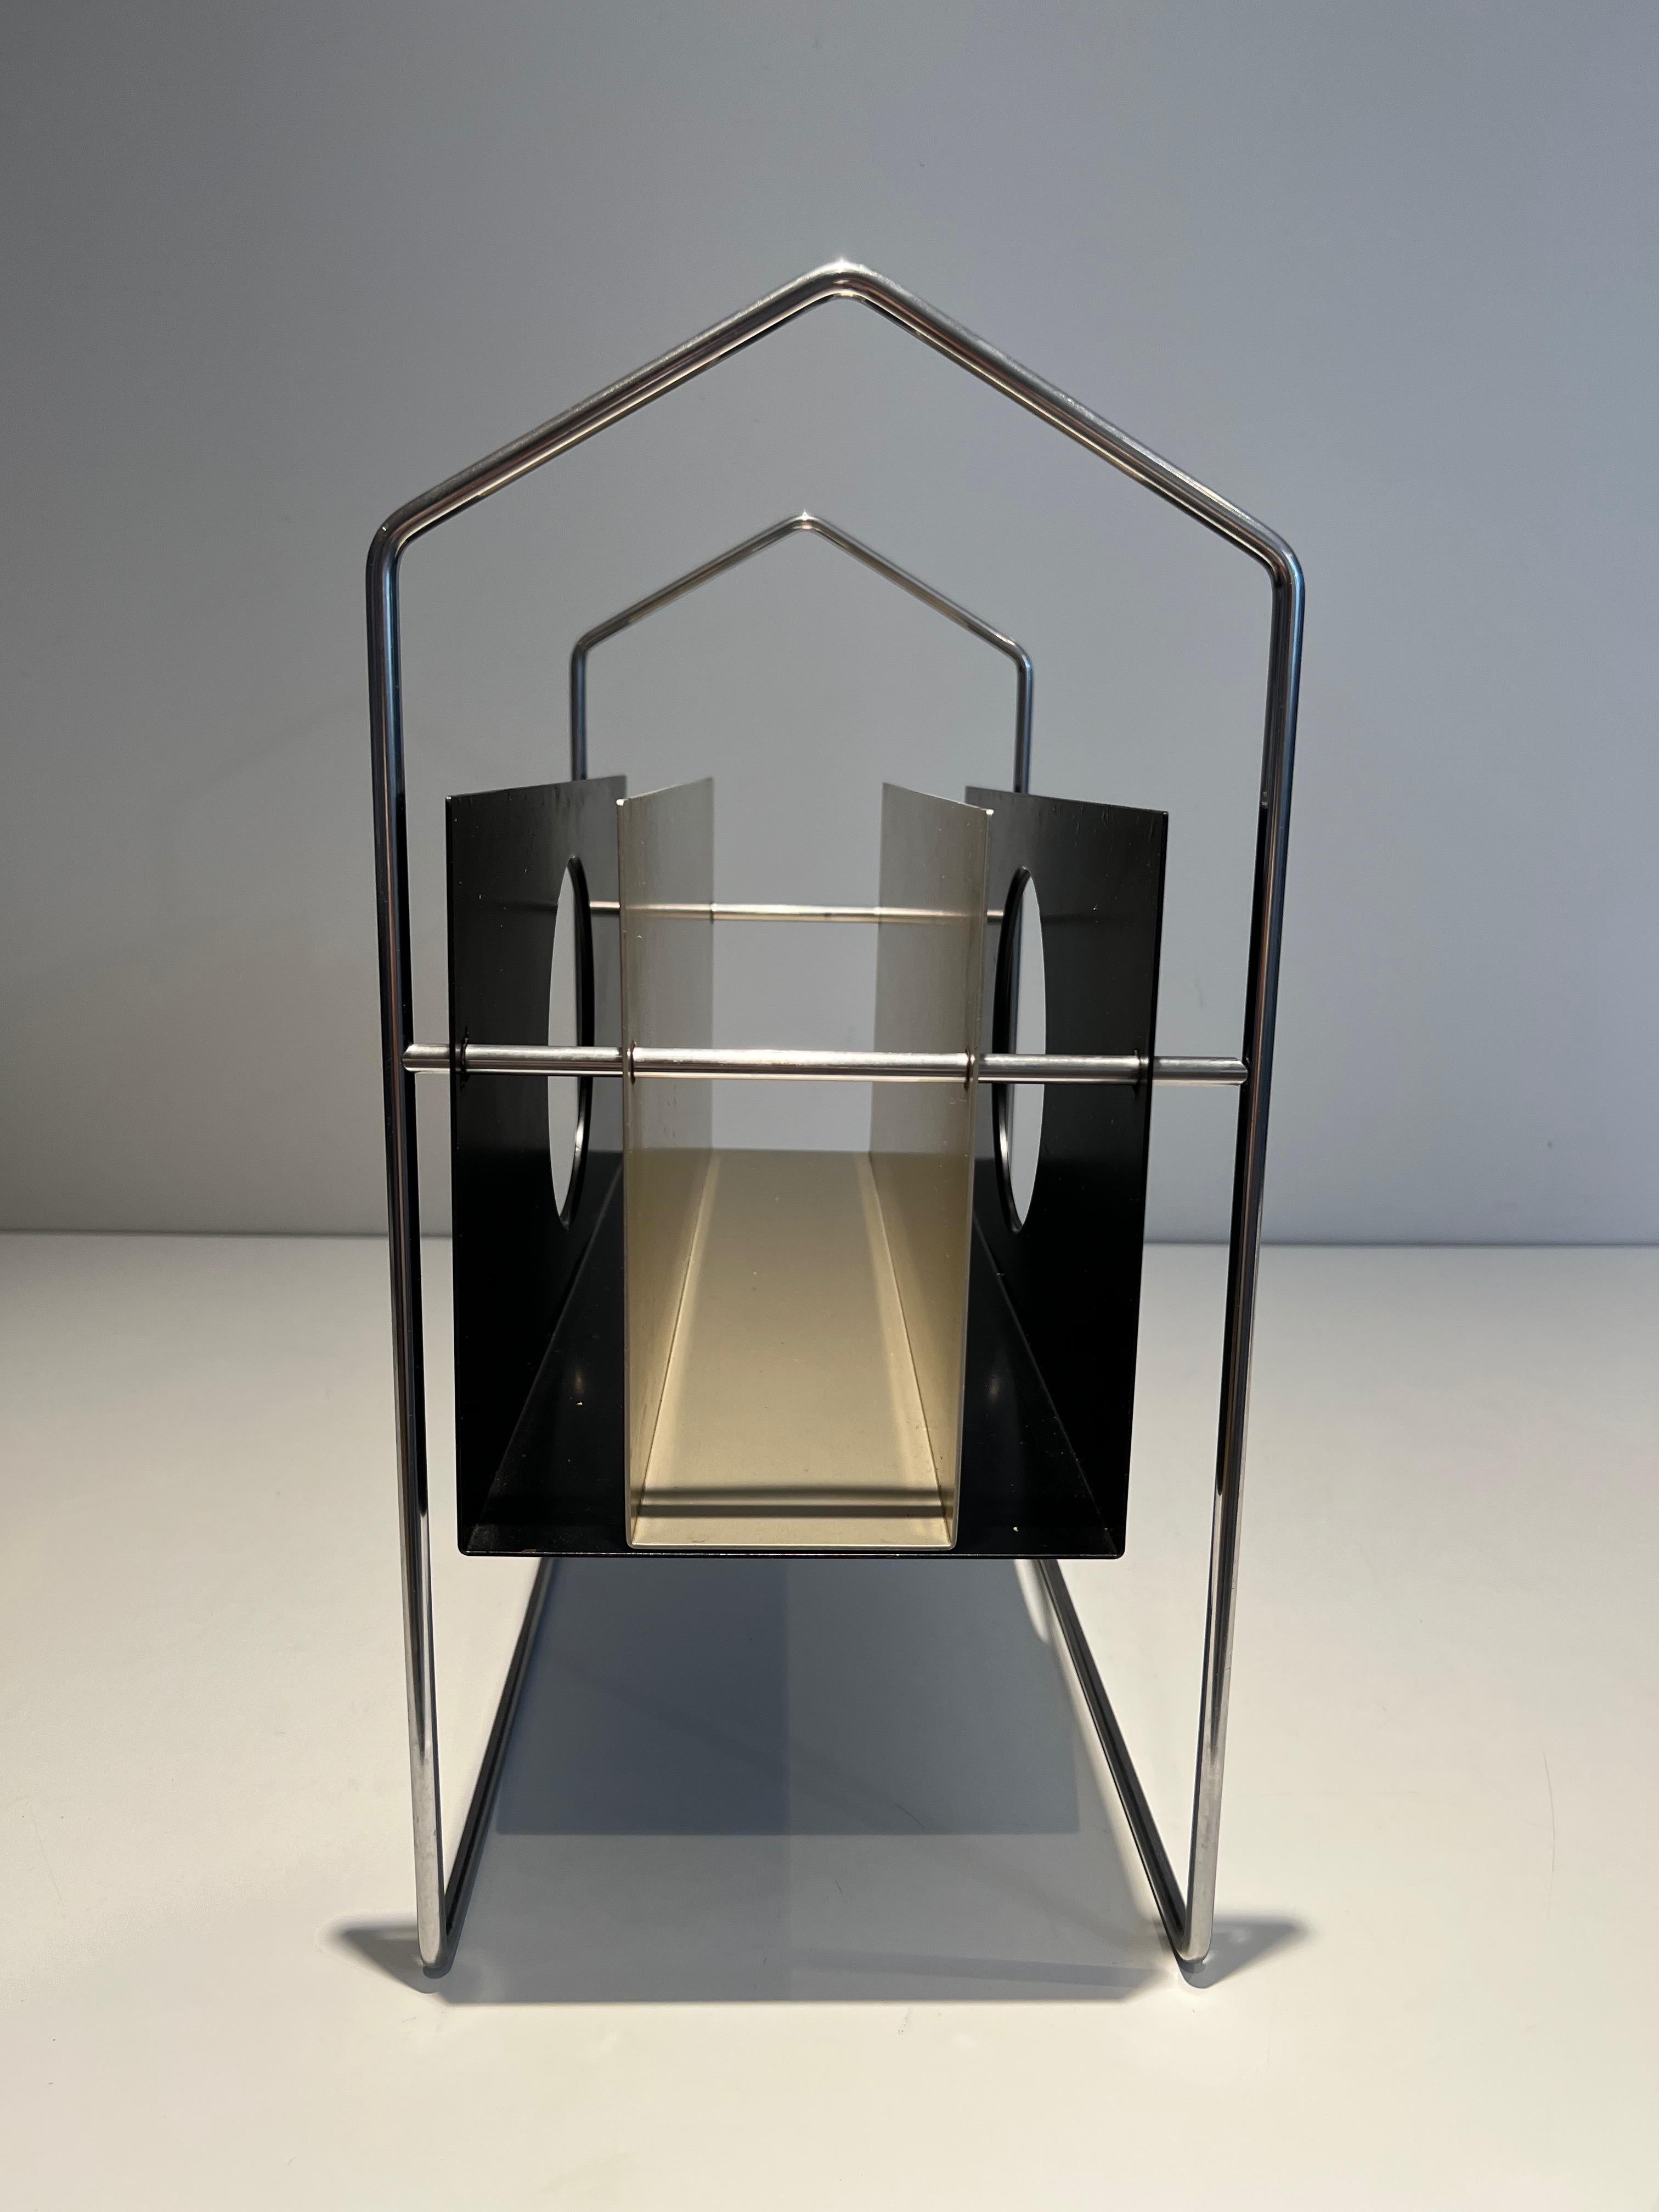 Design Magazine Rack made of Chrome, Black and White Lacquered Metal In Good Condition For Sale In Marcq-en-Barœul, Hauts-de-France